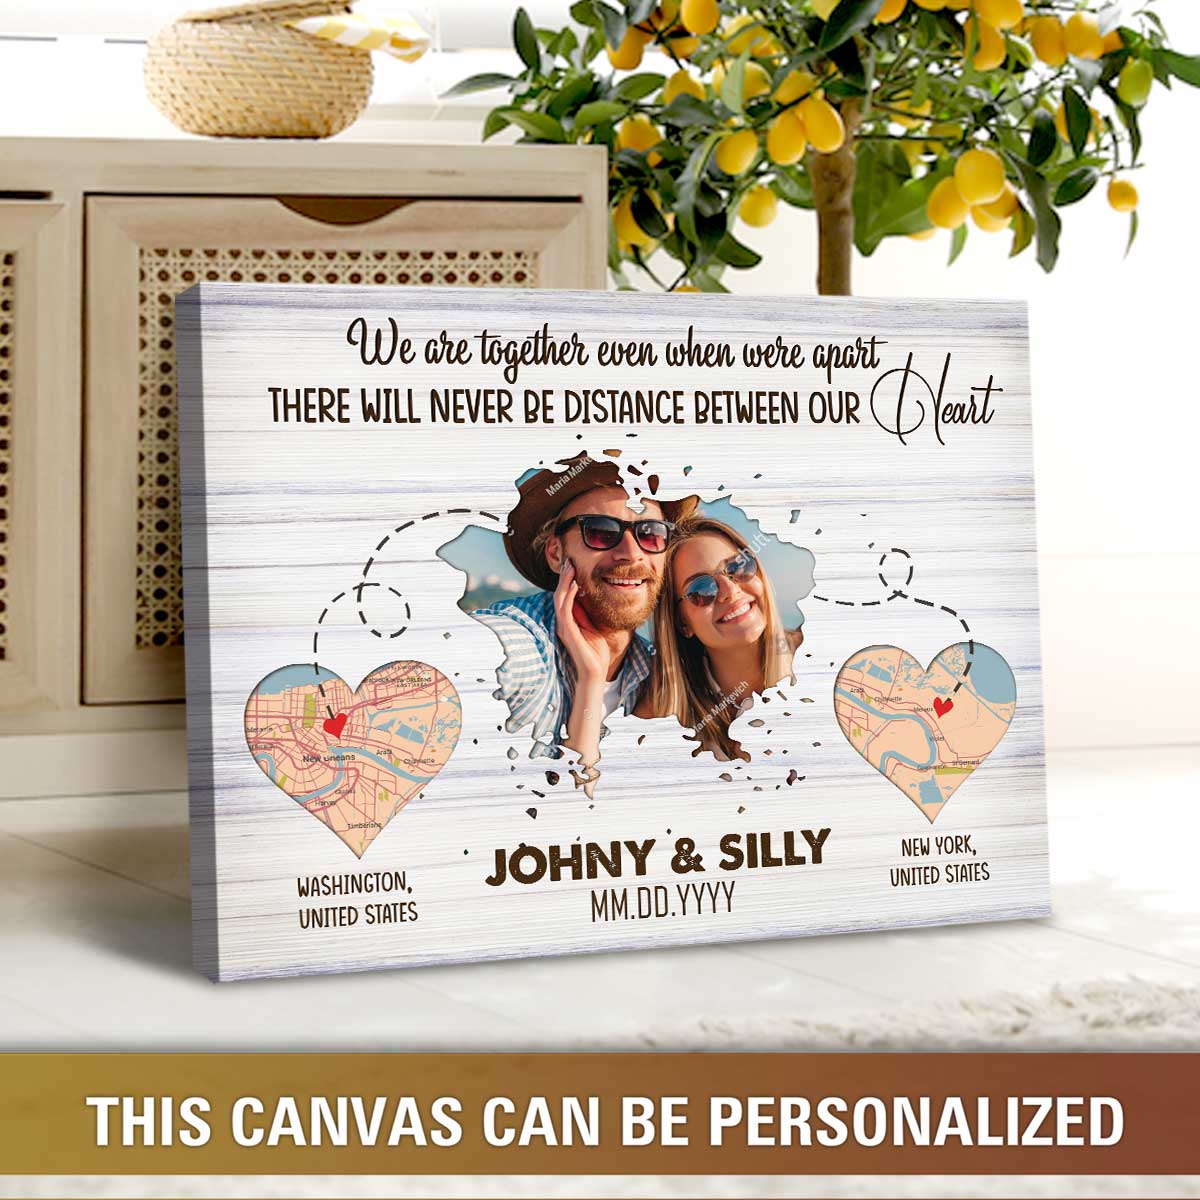 The Best Christmas Gifts for Couples - Personalization Mall